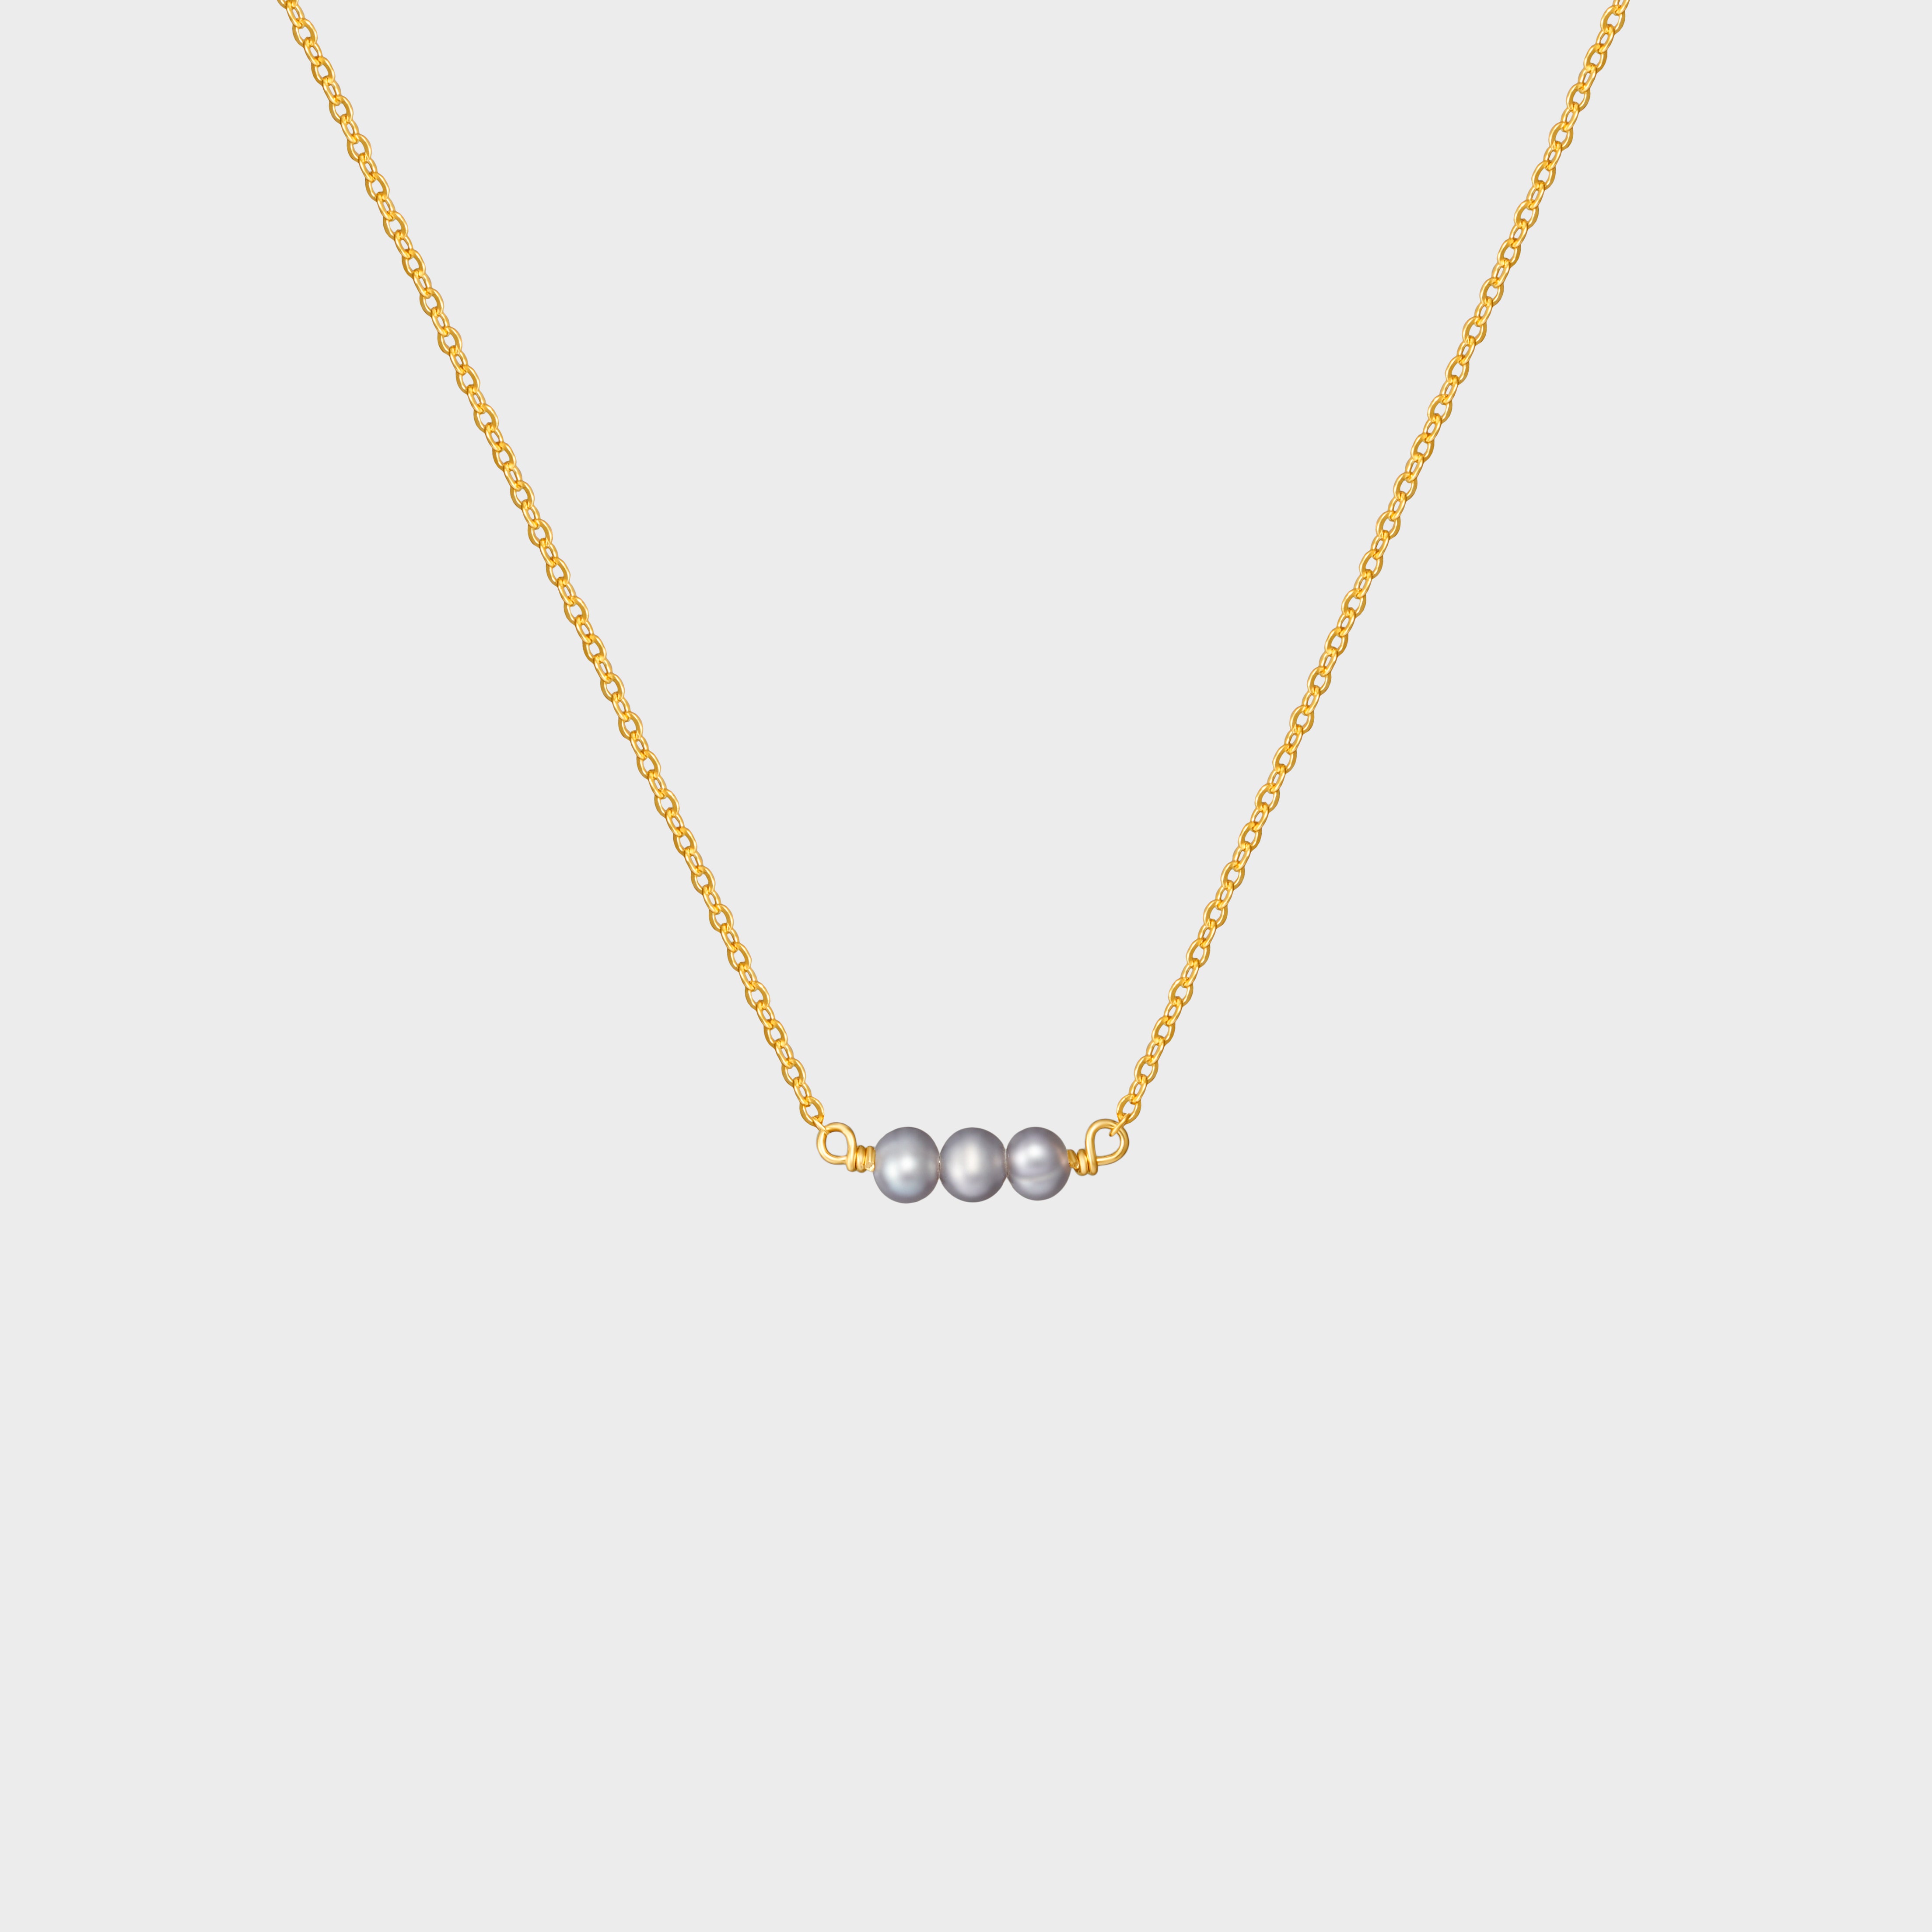 Triple Tiny Grey Pearls Necklace